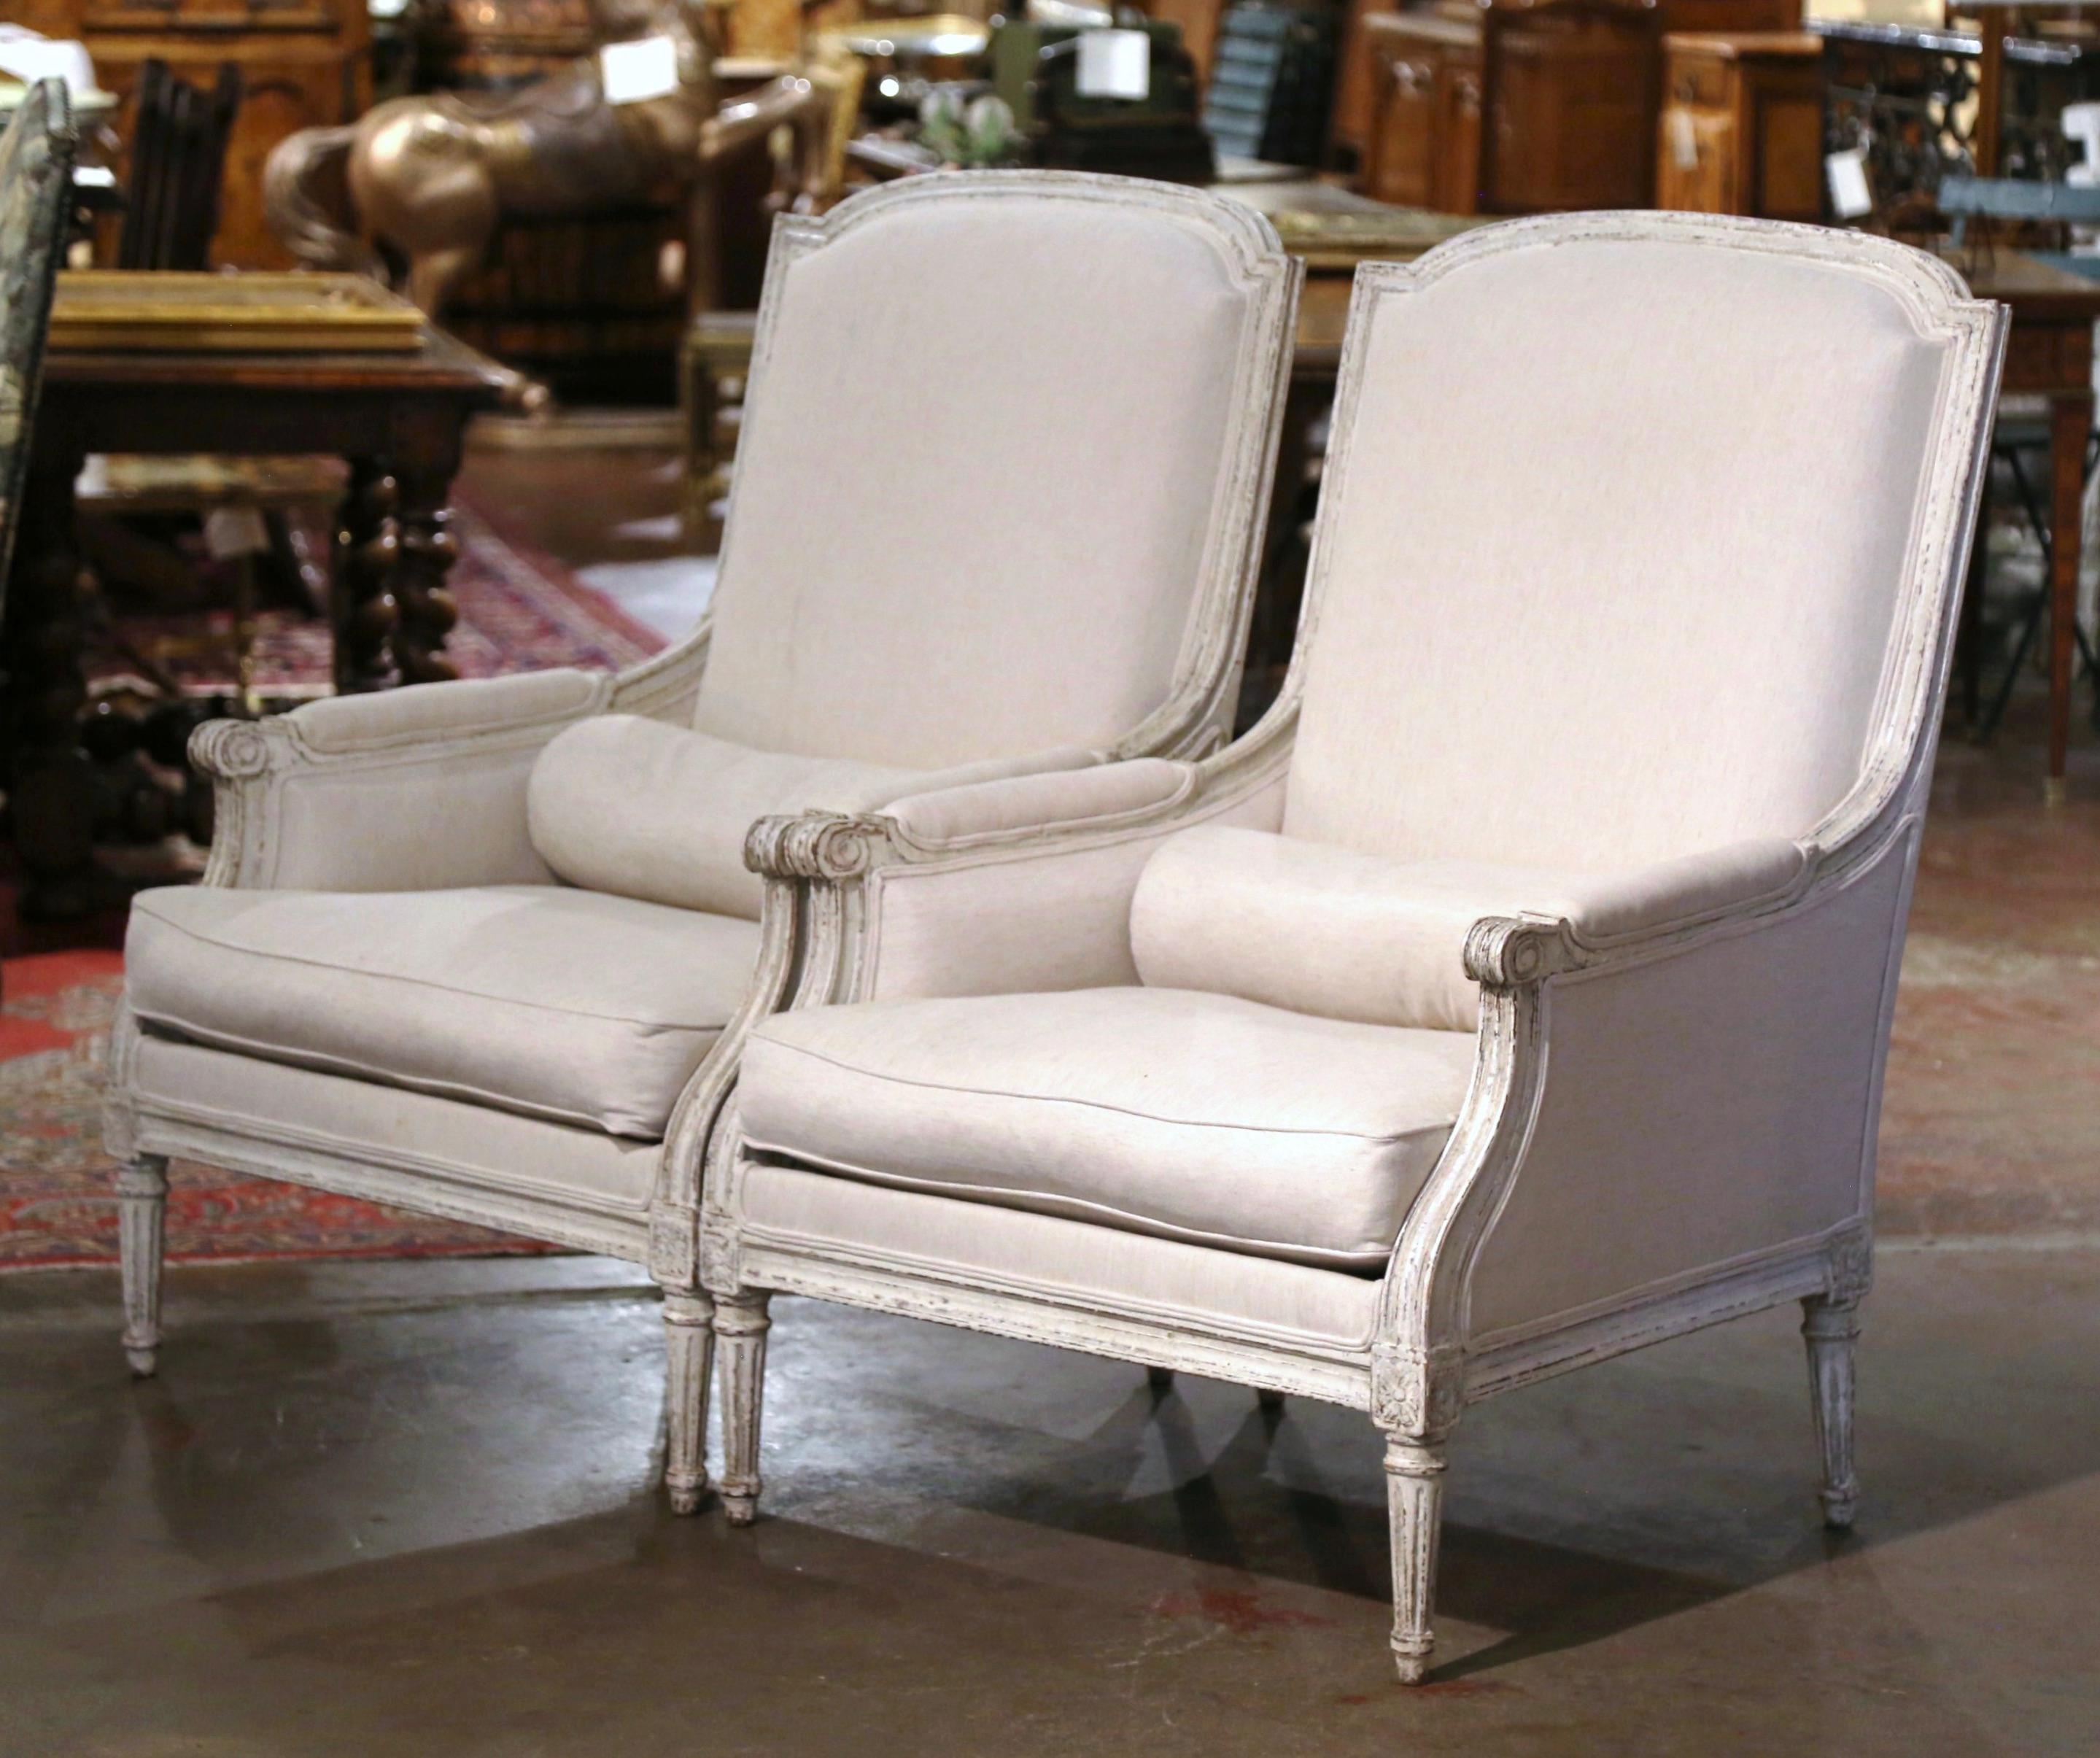 These elegant antique armchairs were created in France, circa 1880. The large fauteuils stand on fluted and tapered legs decorated with square rosette medallions at the shoulders; each chair features a tall arched and curved back dressed with